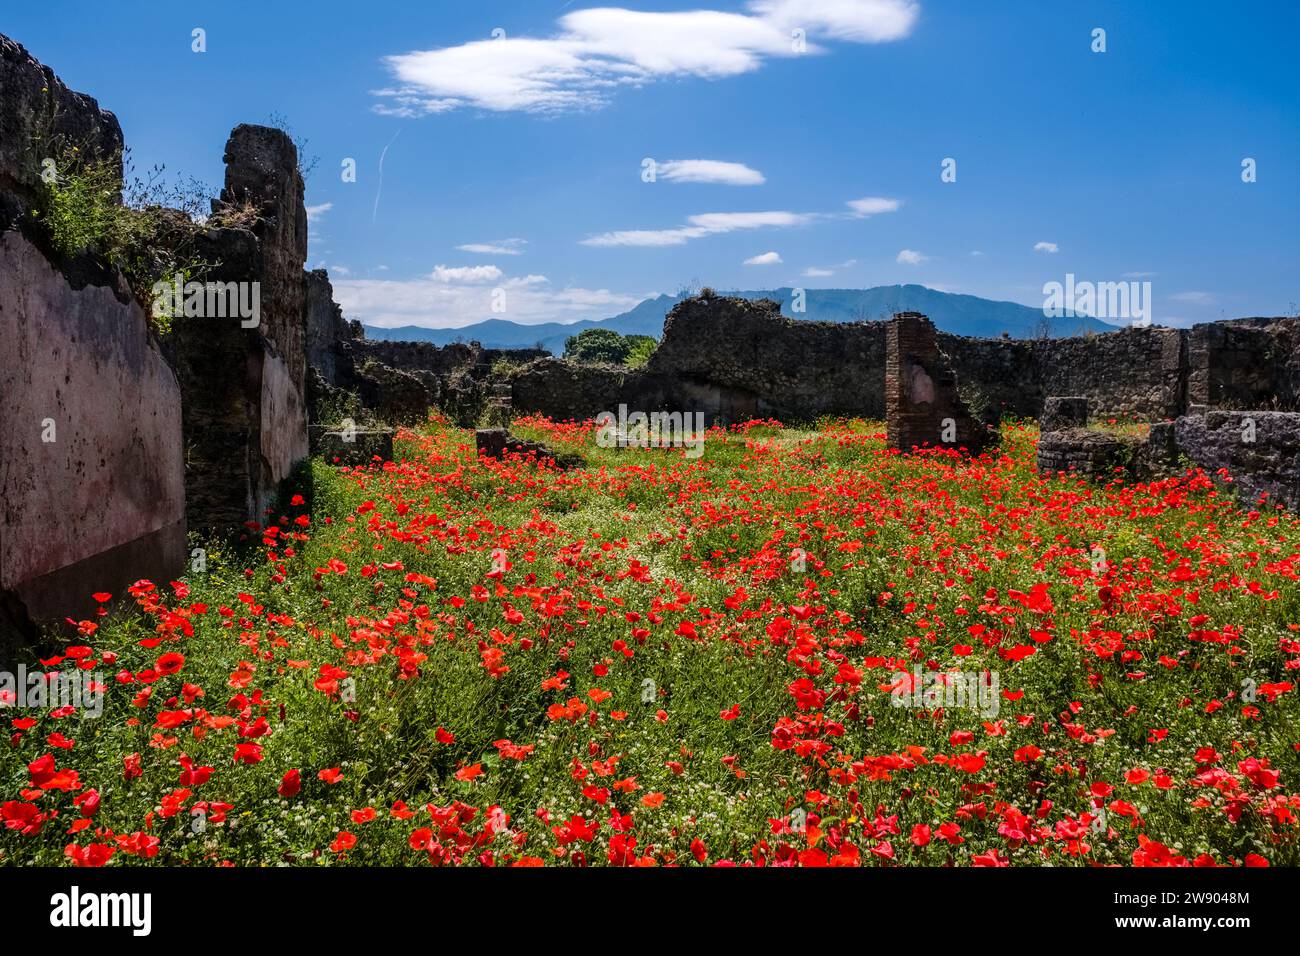 Ruins and poppy flowers in the archaeological site of Pompeii, an ancient city destroyed by the eruption of Mount Vesuvius in 79 AD. Stock Photo